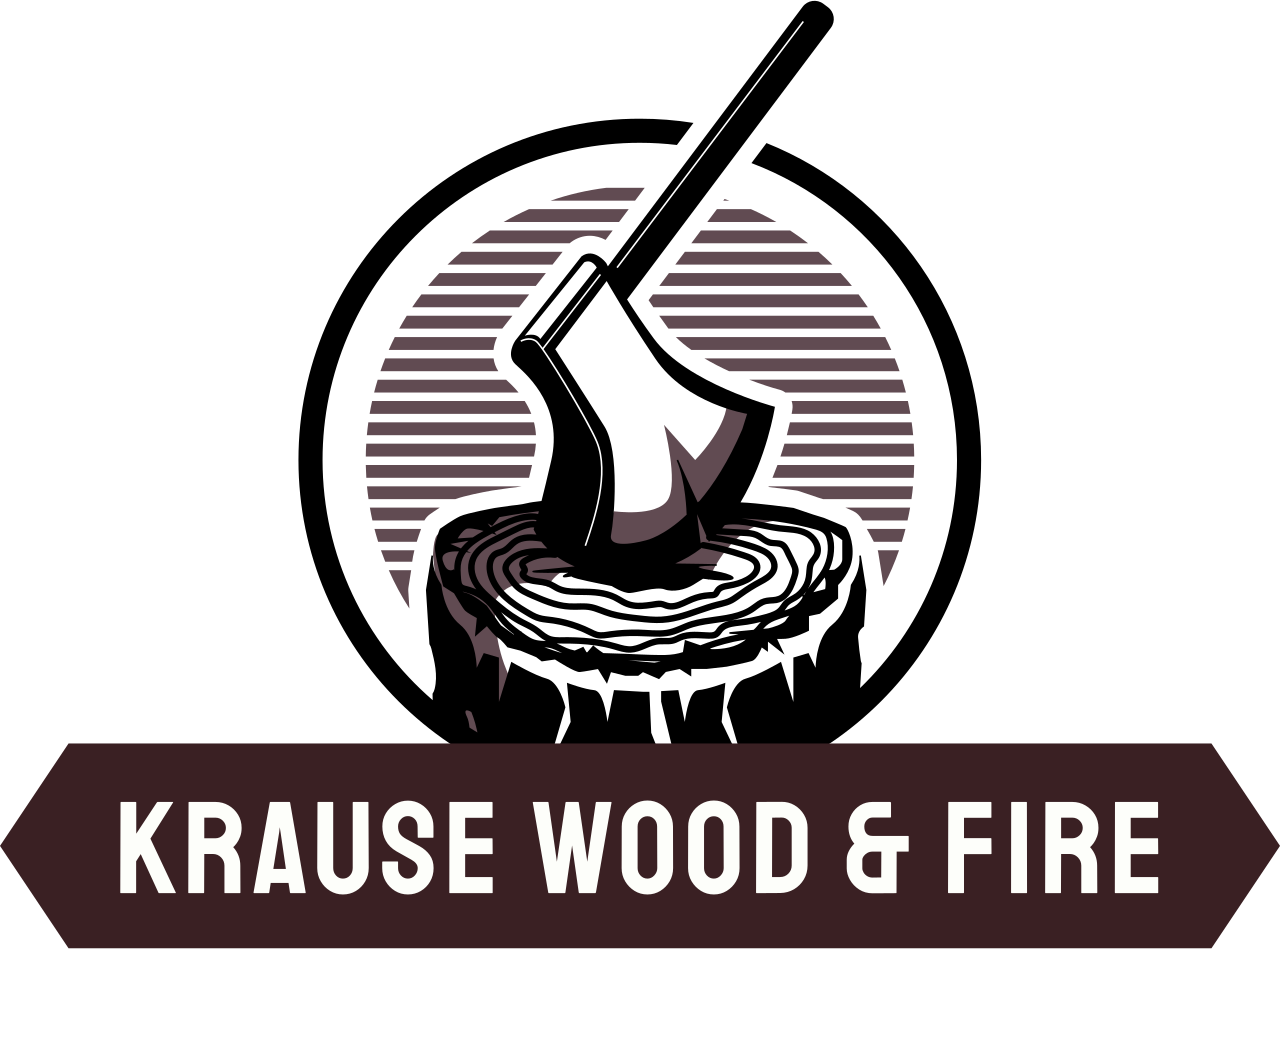 Krause wood & fire's web page